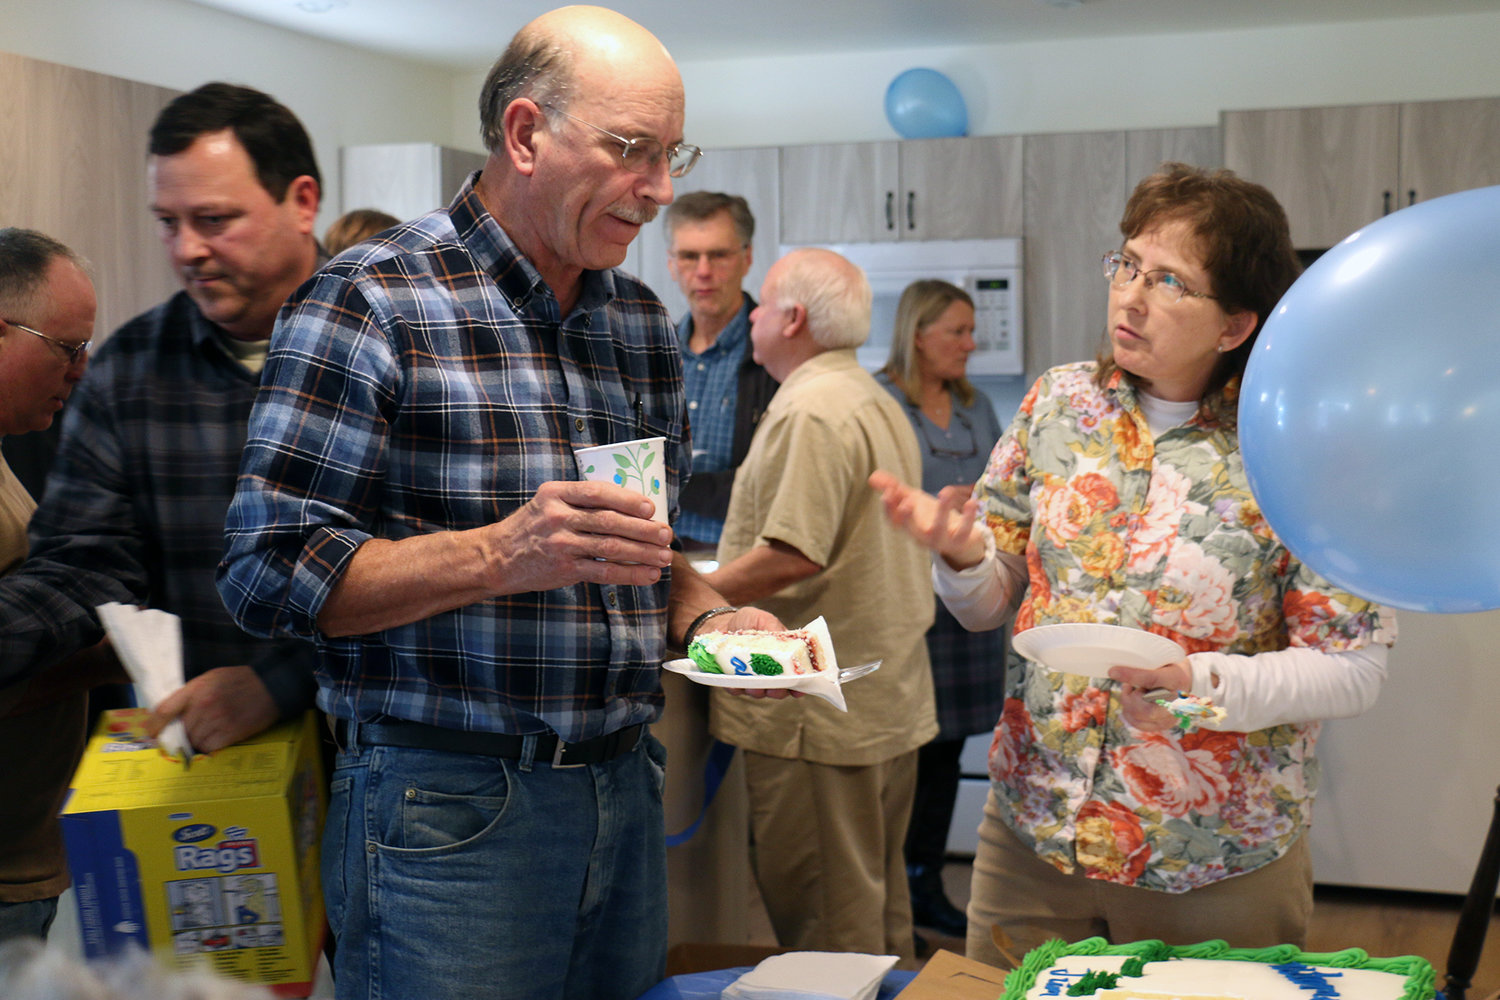 Jeanette Southmayd speaks with Greater Lewis County Habitat for Humanity’s assistant production manager Richard Tausch on Saturday. Southmayd and her husband Jim took part in the ceremony where they were awarded a new house located in Chehalis.